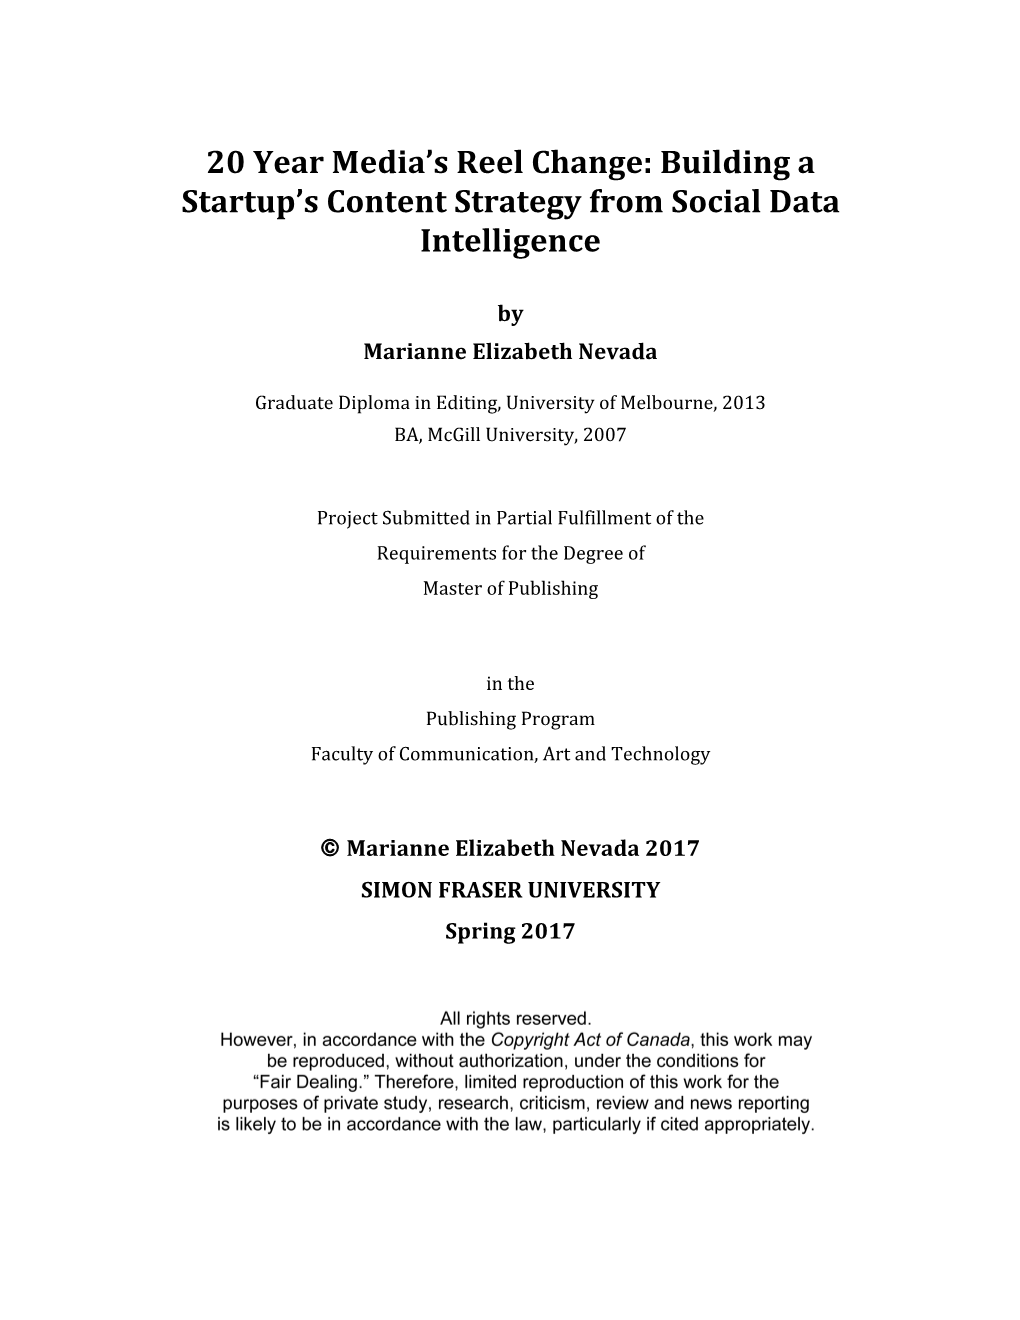 Building a Startup's Content Strategy from Social Data Intelligence